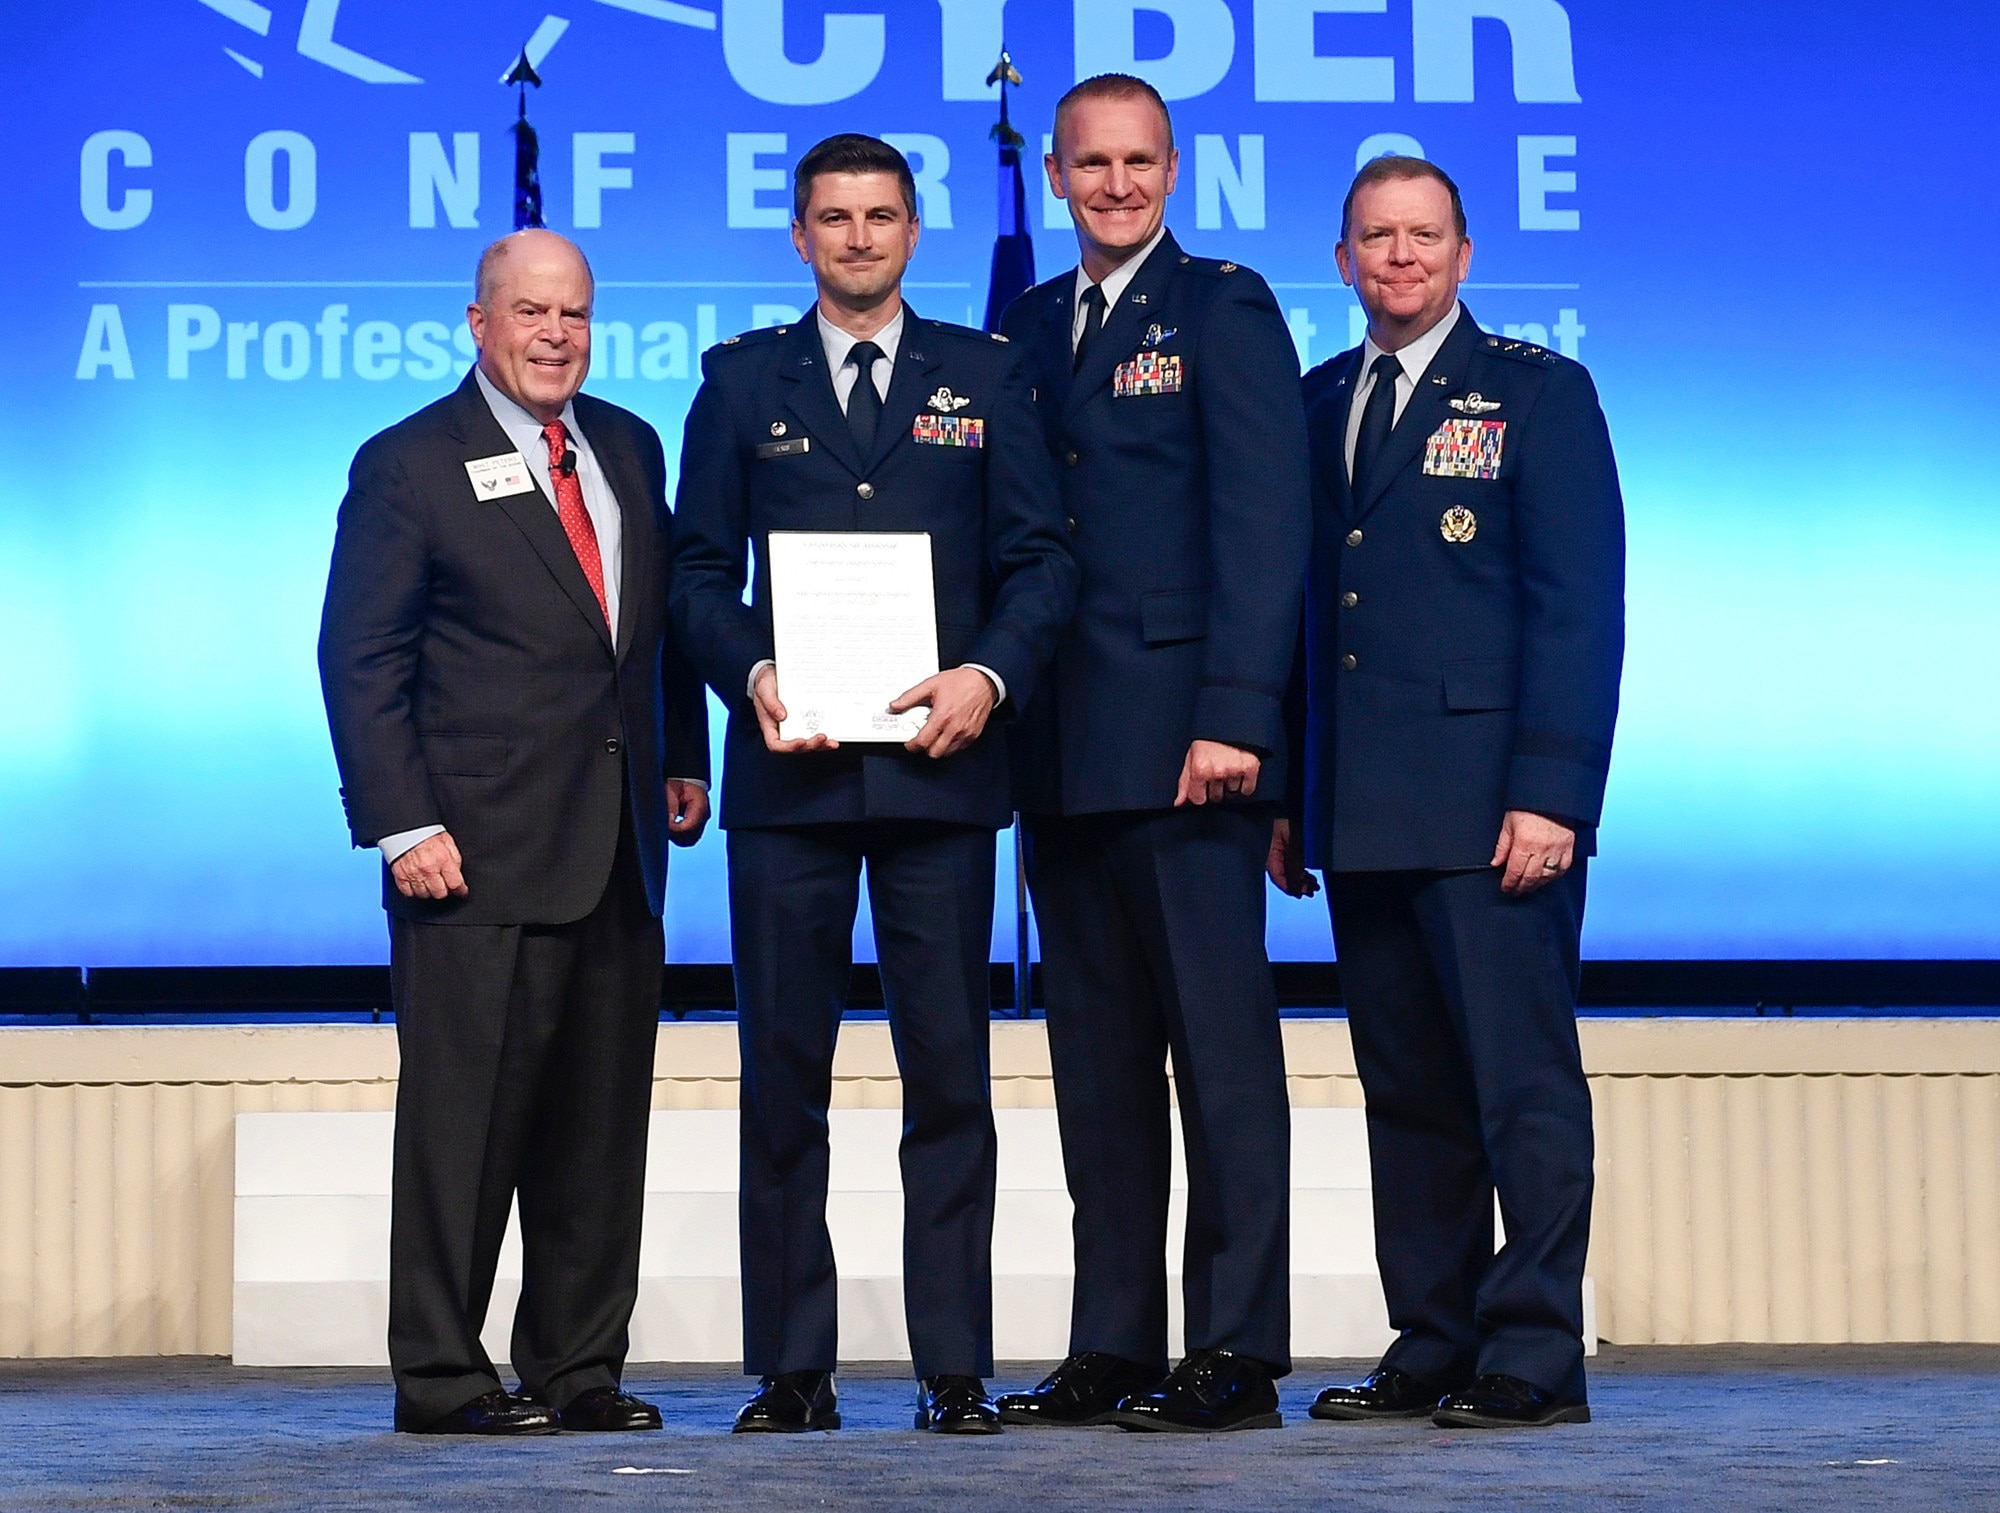 Representatives of the 706th Fighter Squadron receives the Citation of Honor during the Air Force Association Air, Space and Cyber Conference in National Harbor, Md., Sept. 16, 2019. (U.S. Air Force photo by Andy Morataya)